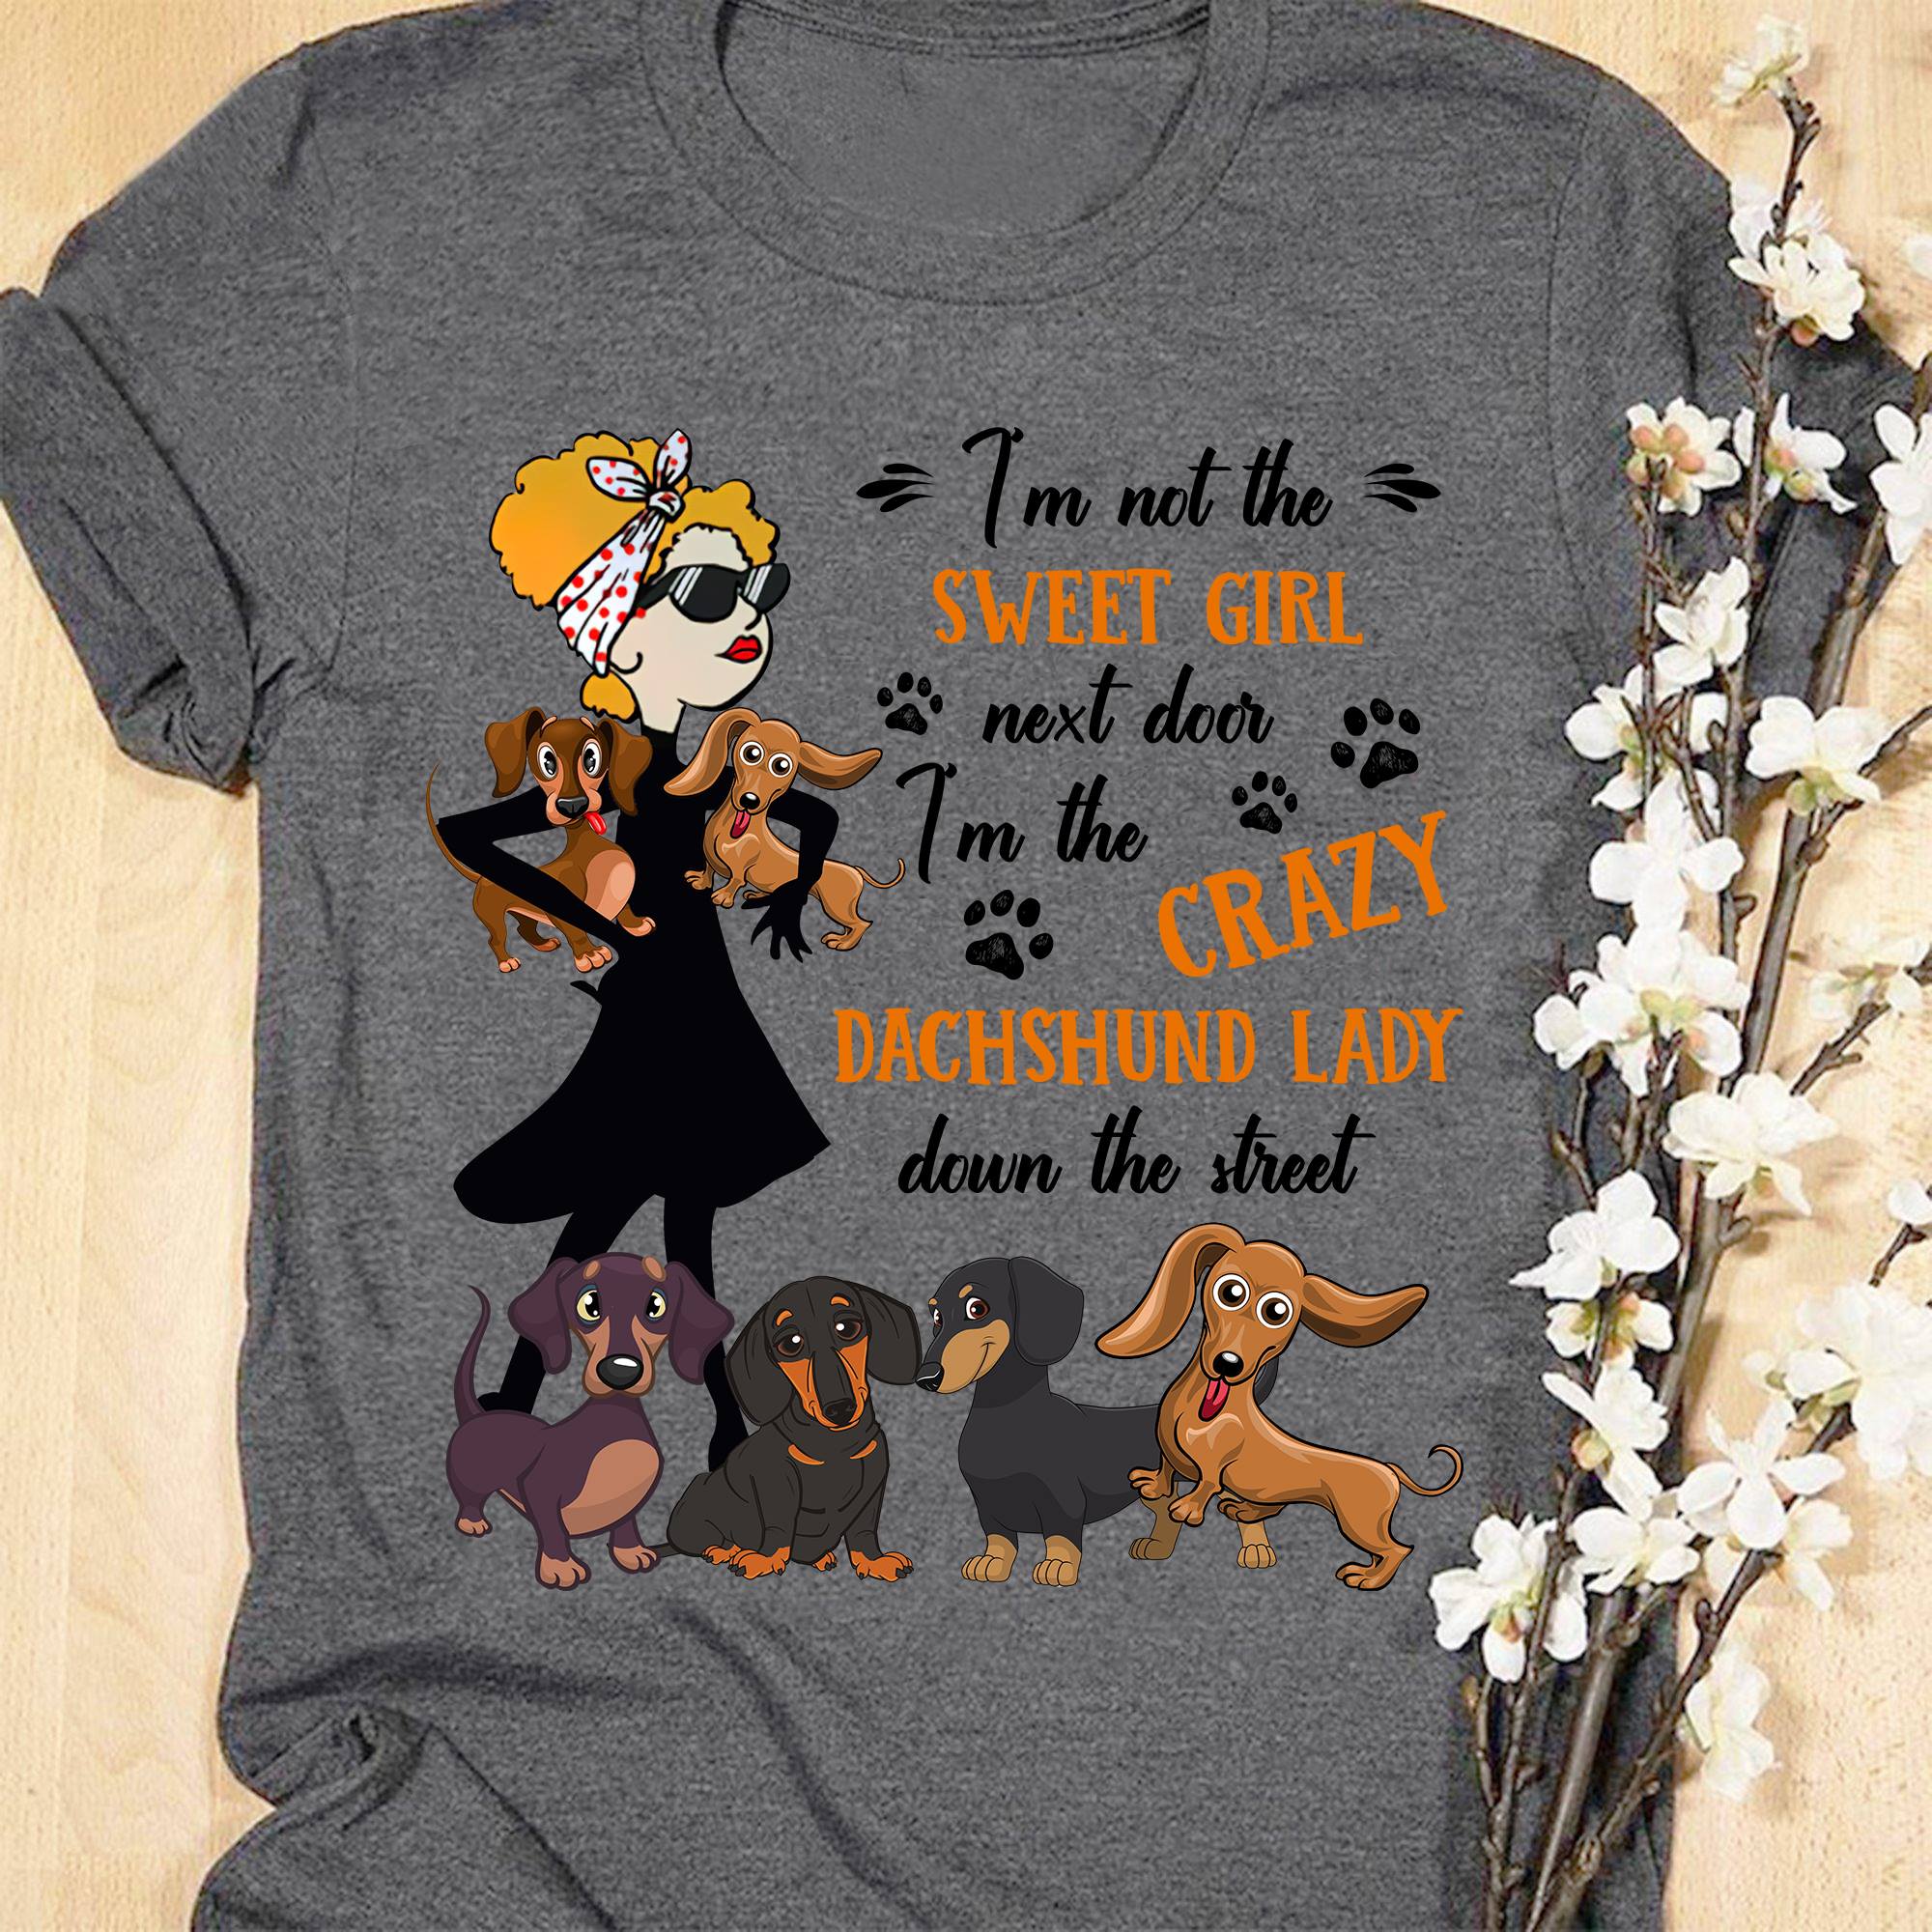 I'm not the sweet girl next door I'm the crazy Dachshund lady down the street - Dog lover